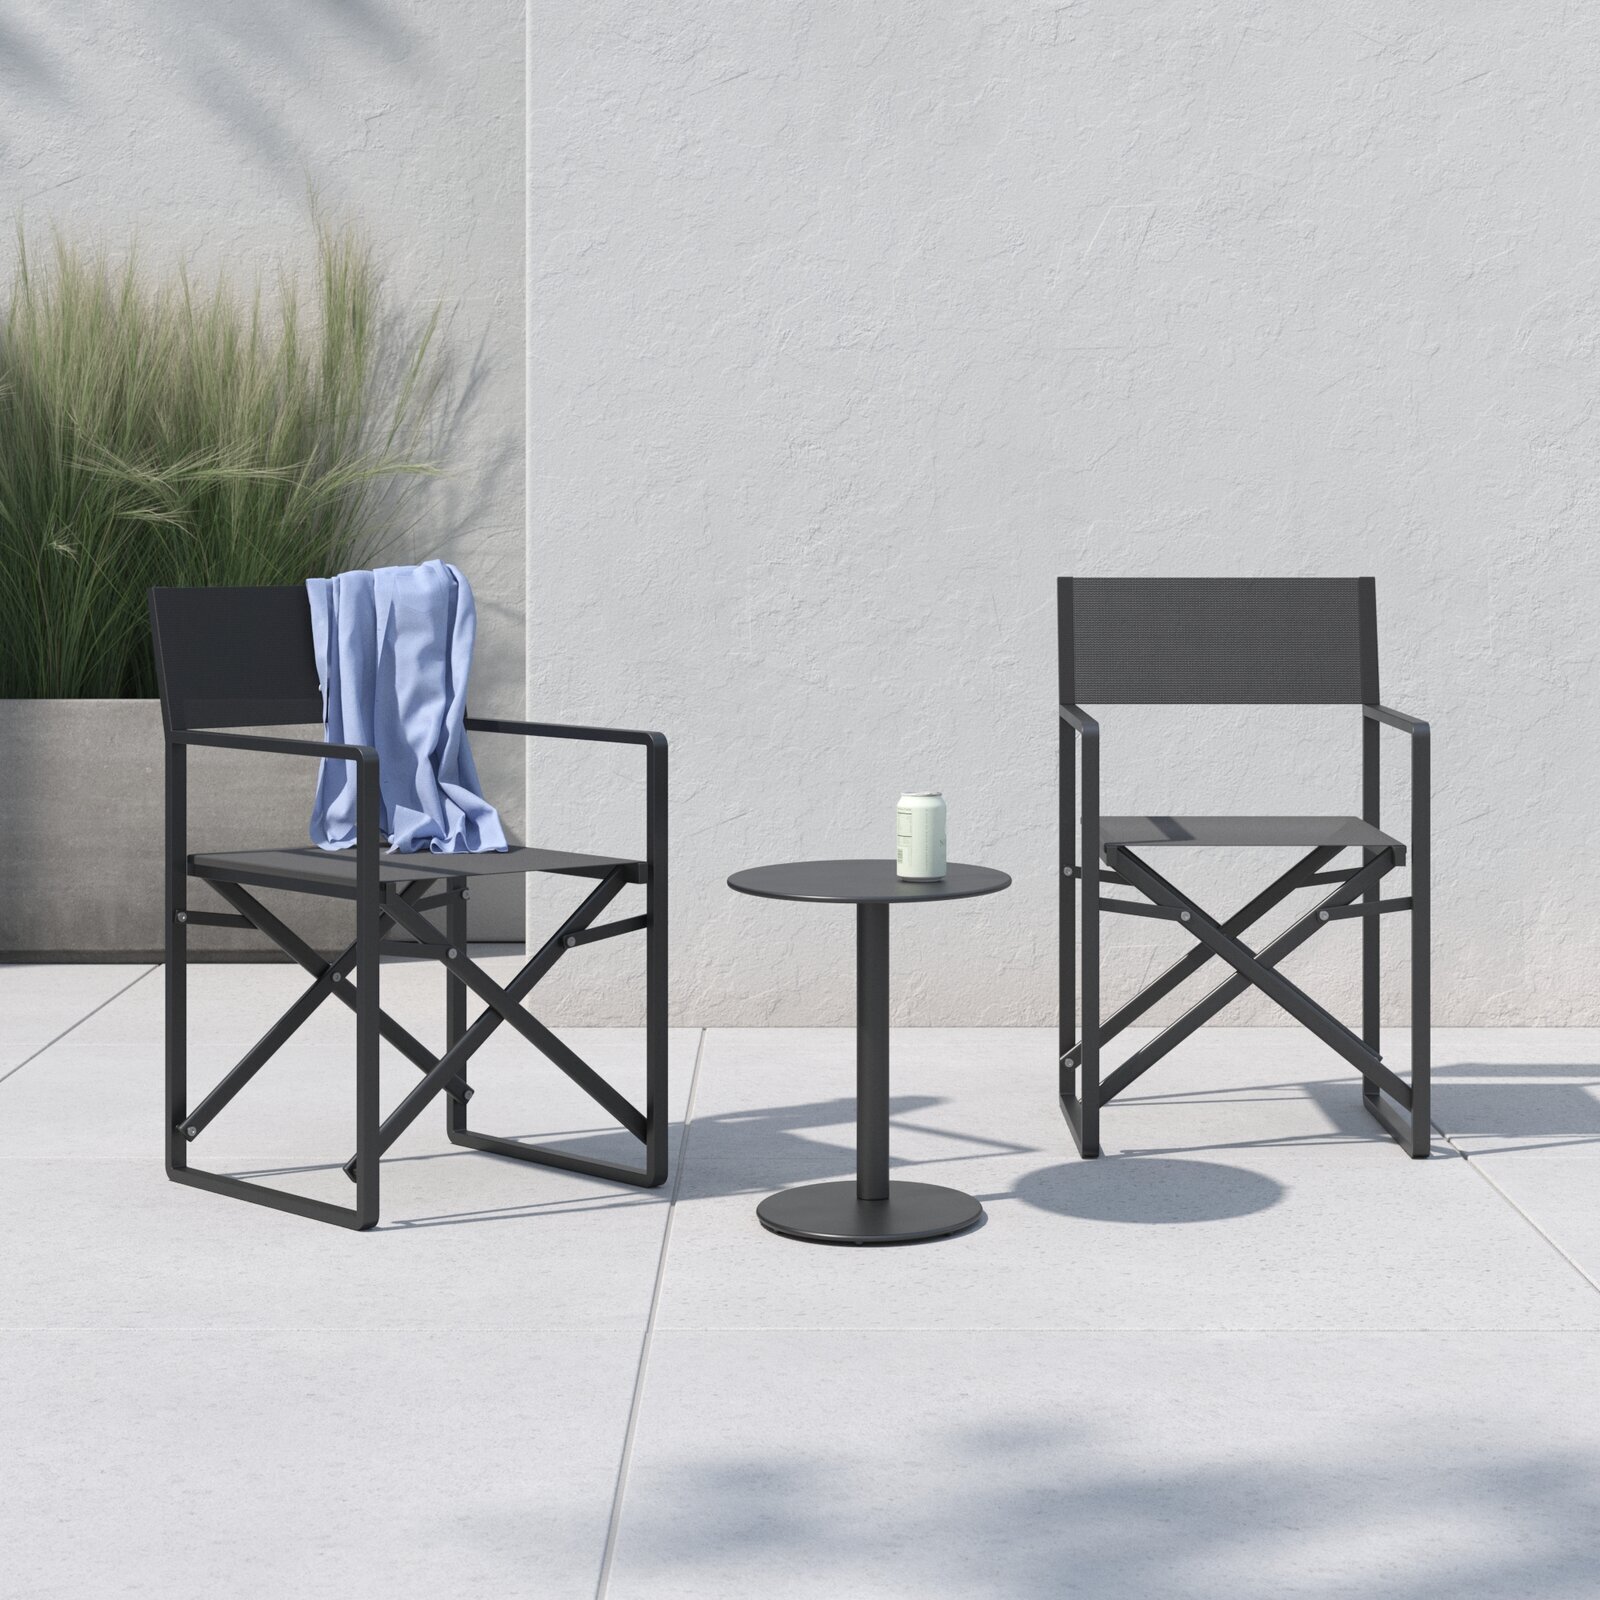 Modern Foldable Chairs With Side Table